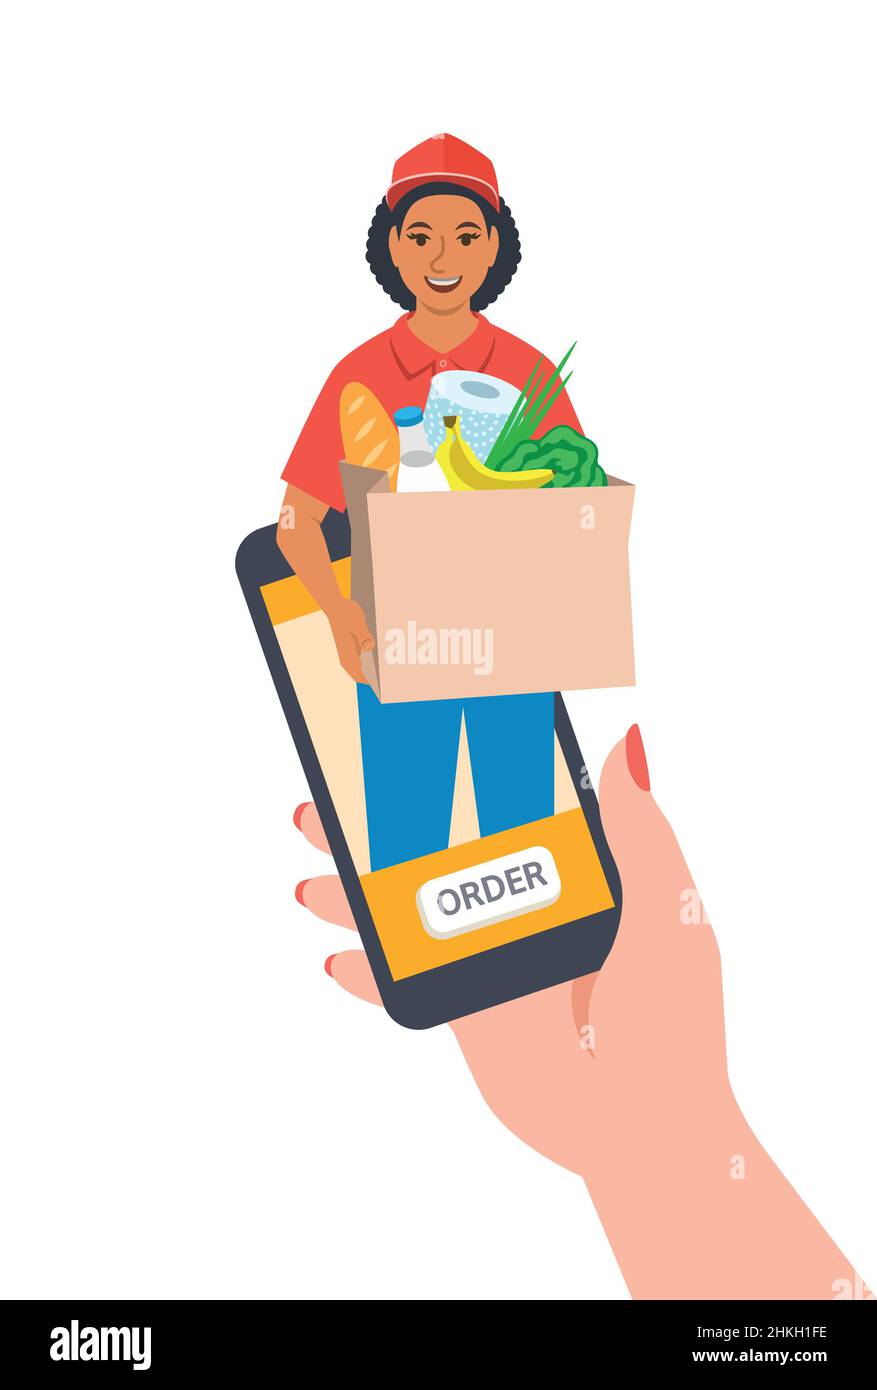 Express delivery concept. Customer makes an order online using smartphone app and gets it fast. Friendly courier gives a paper bag with groceries to b Stock Vector